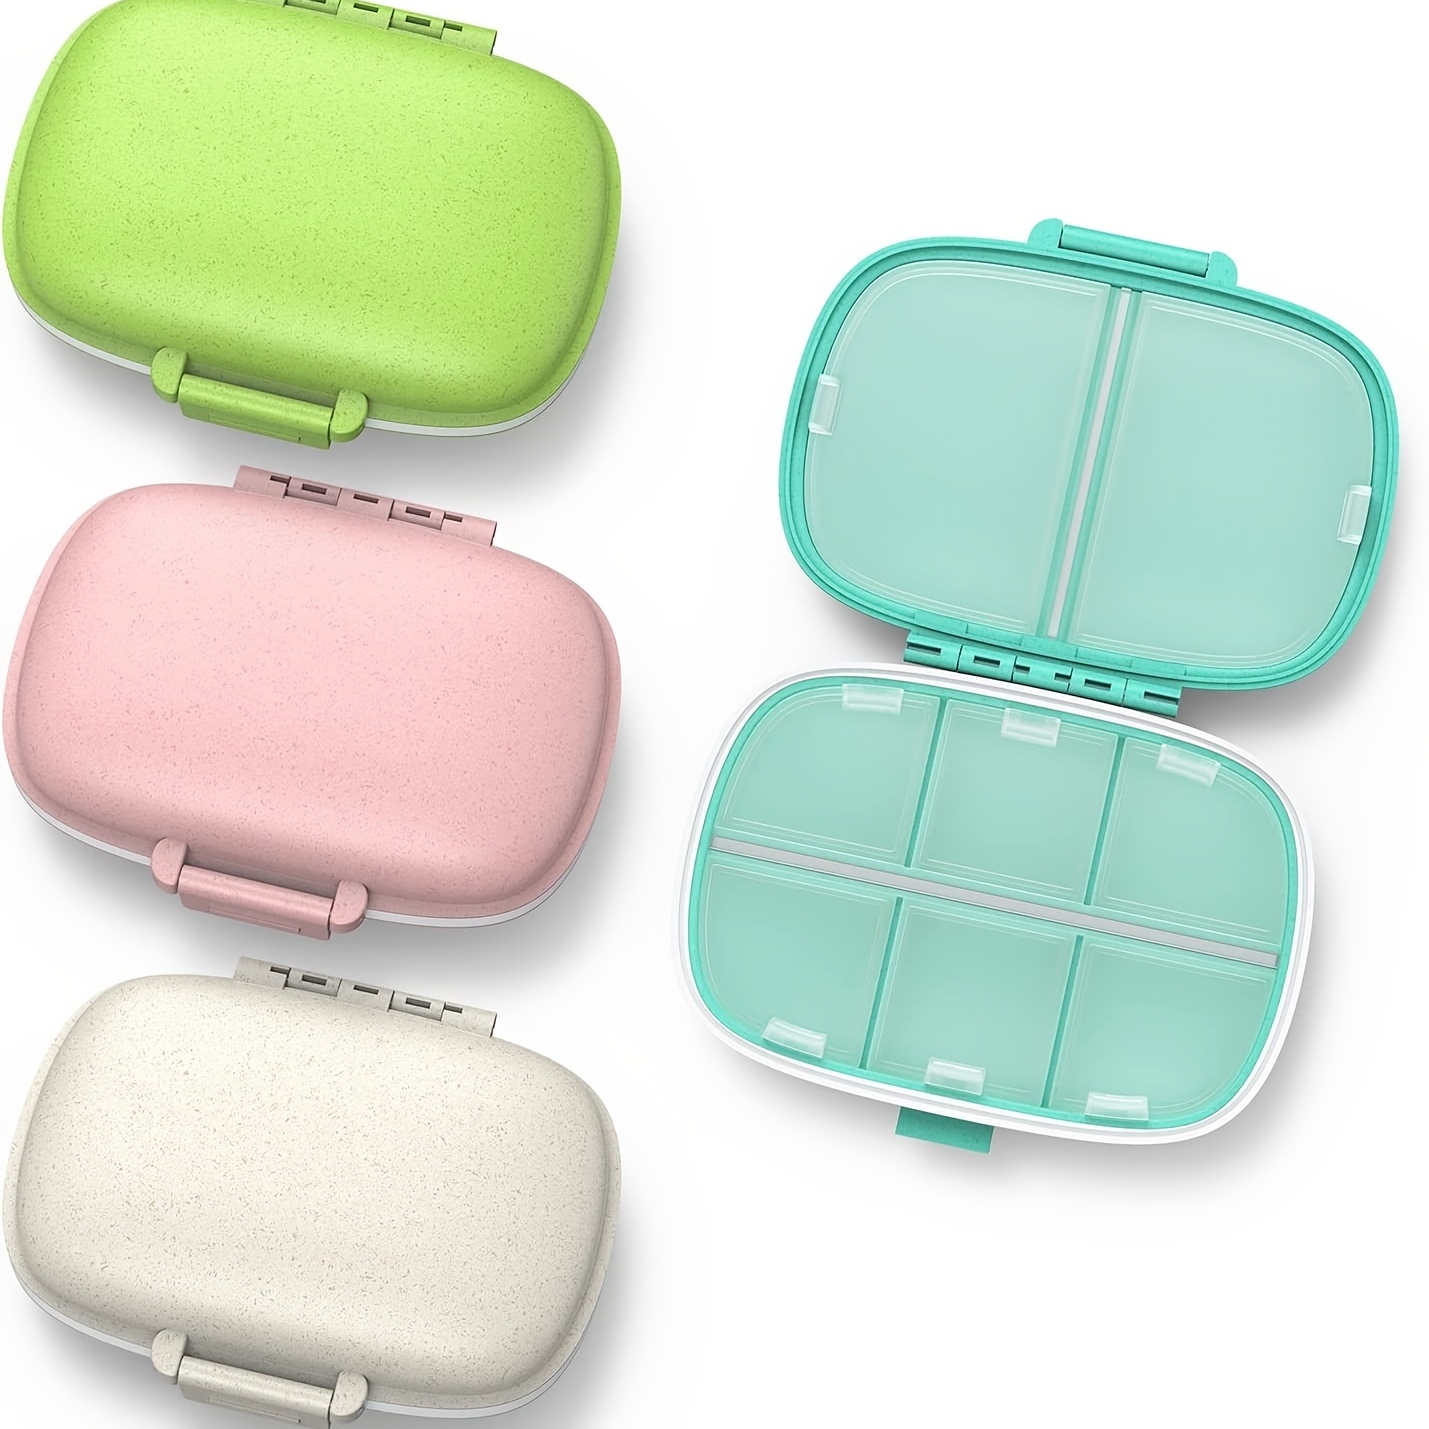 Travel Pill Organizer W Lables, Small Compartments Pocket Pharmacy